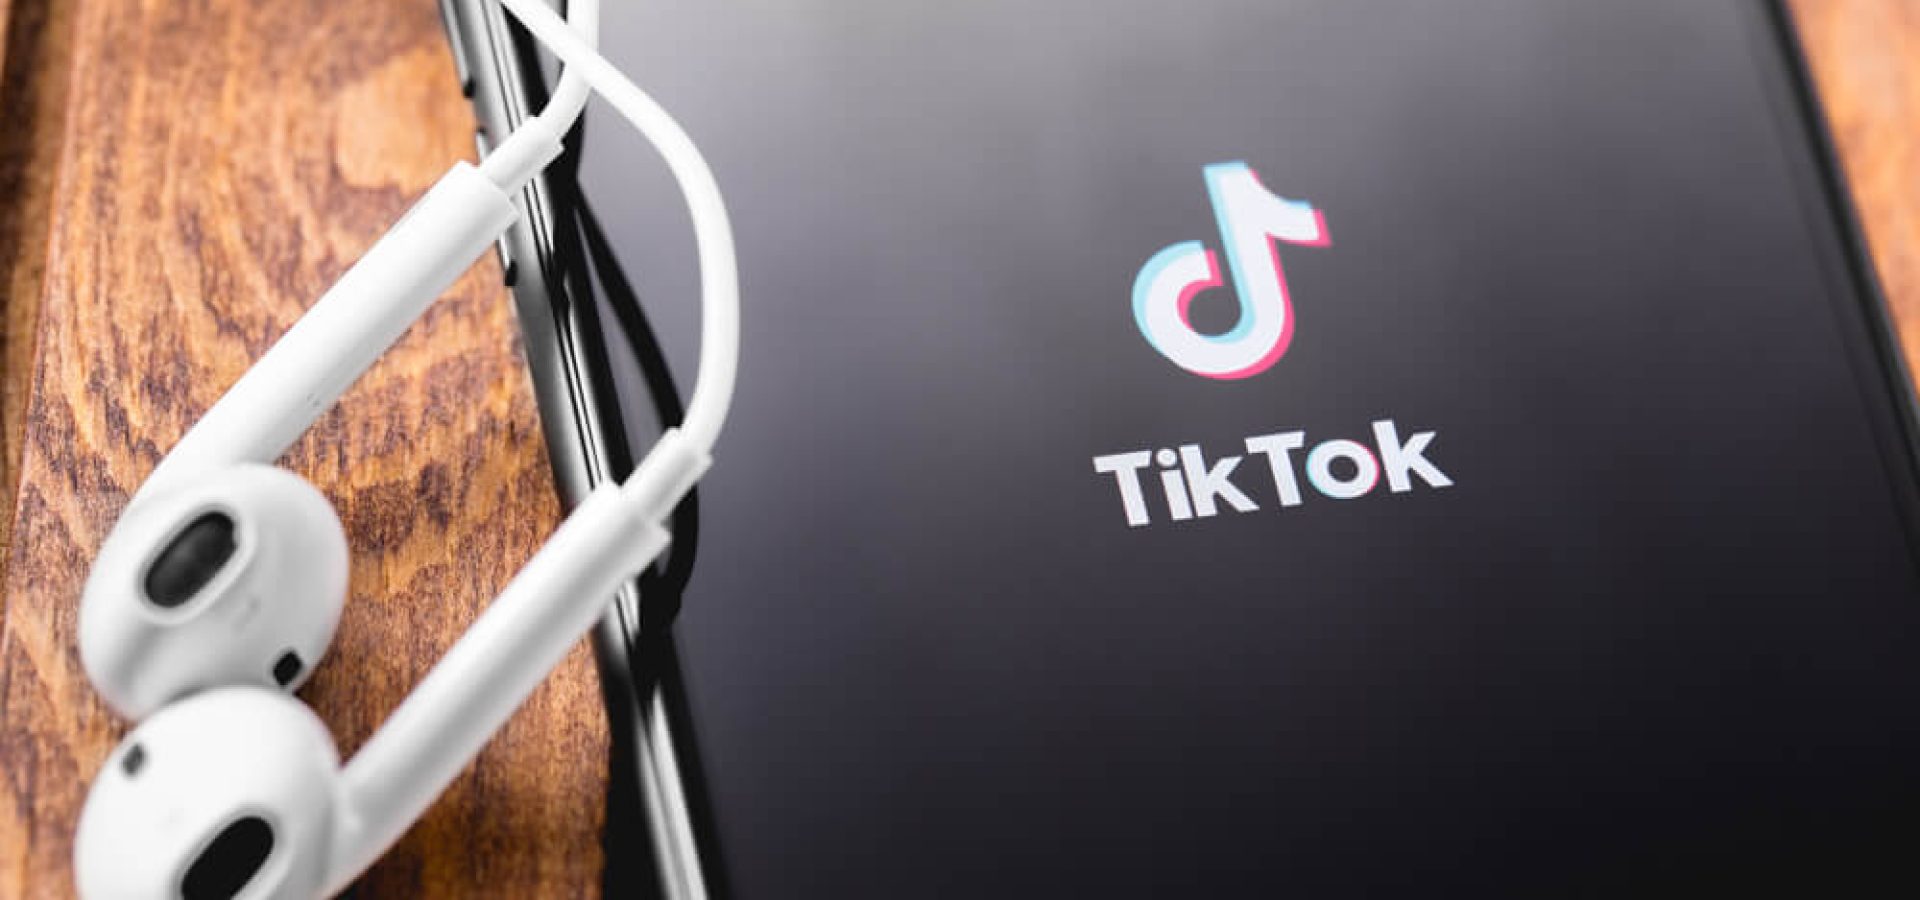 Tik Tok China: The icon of Tik Tok is shown on the screen of the phone with a pair of earpods. Wibest Broker